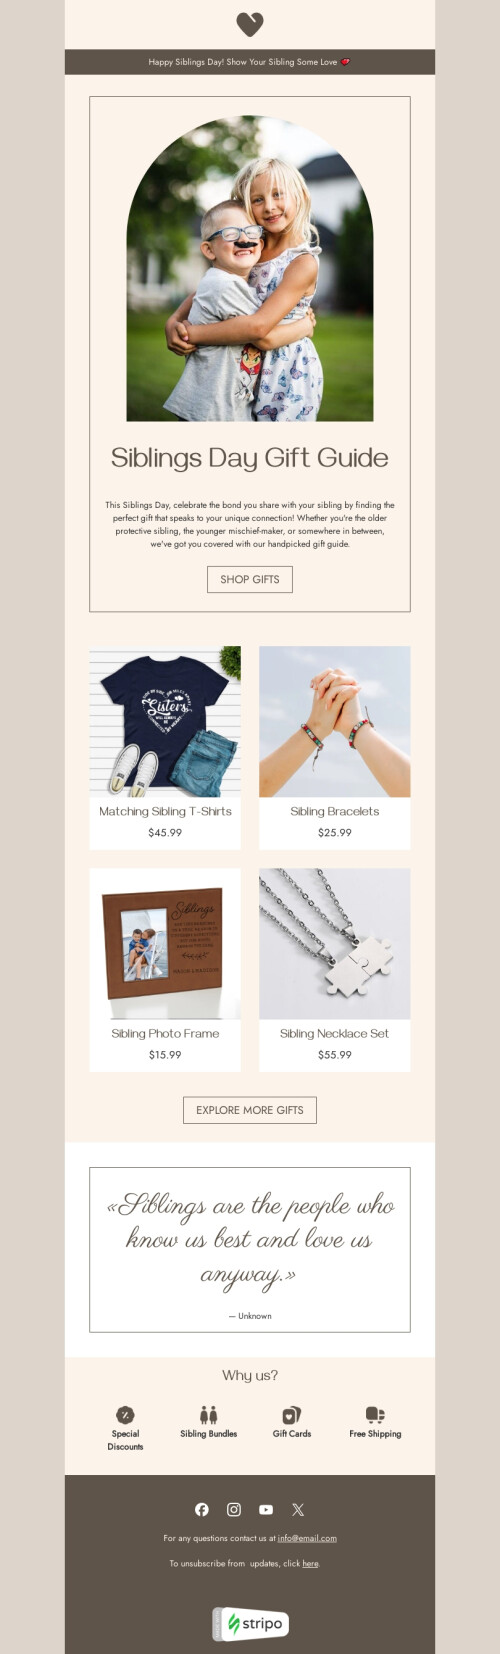 Siblings Day email template "Gift for siblings" for ecommerce industry mobile view